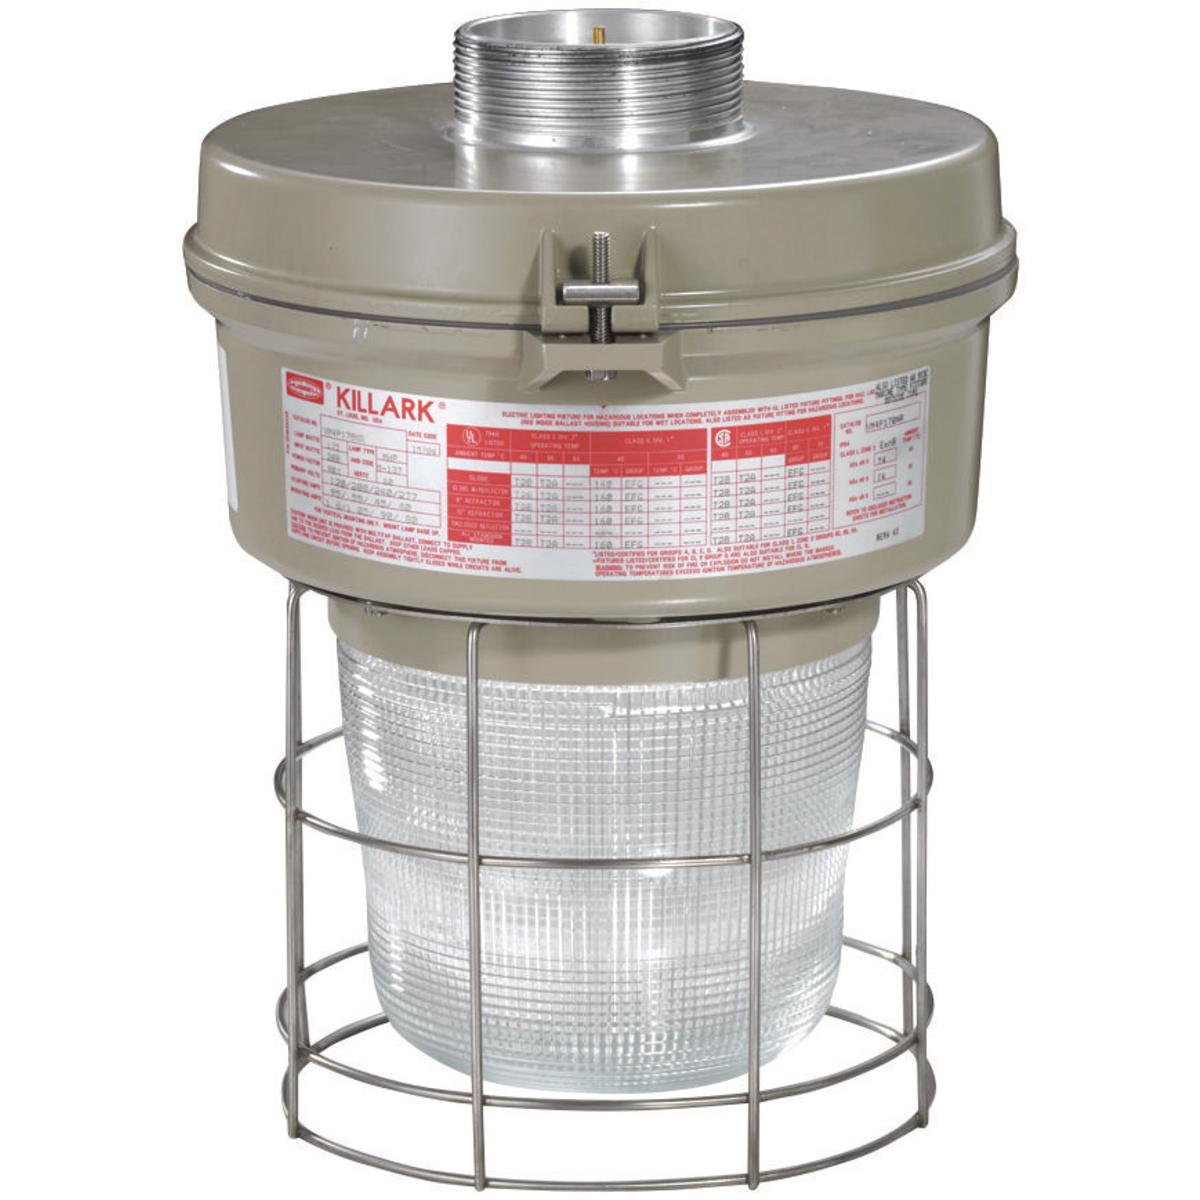 Hubbell VM4P200EZGLG VM4 Series - 200W Metal Halide Quadri-Volt - EZ Mount Adapter - Globe and Guard  ; Ballast tank and splice box – corrosion resistant copper-free aluminum alloy with baked powder epoxy/polyester finish, electrostatically applied for complete, uniform corro